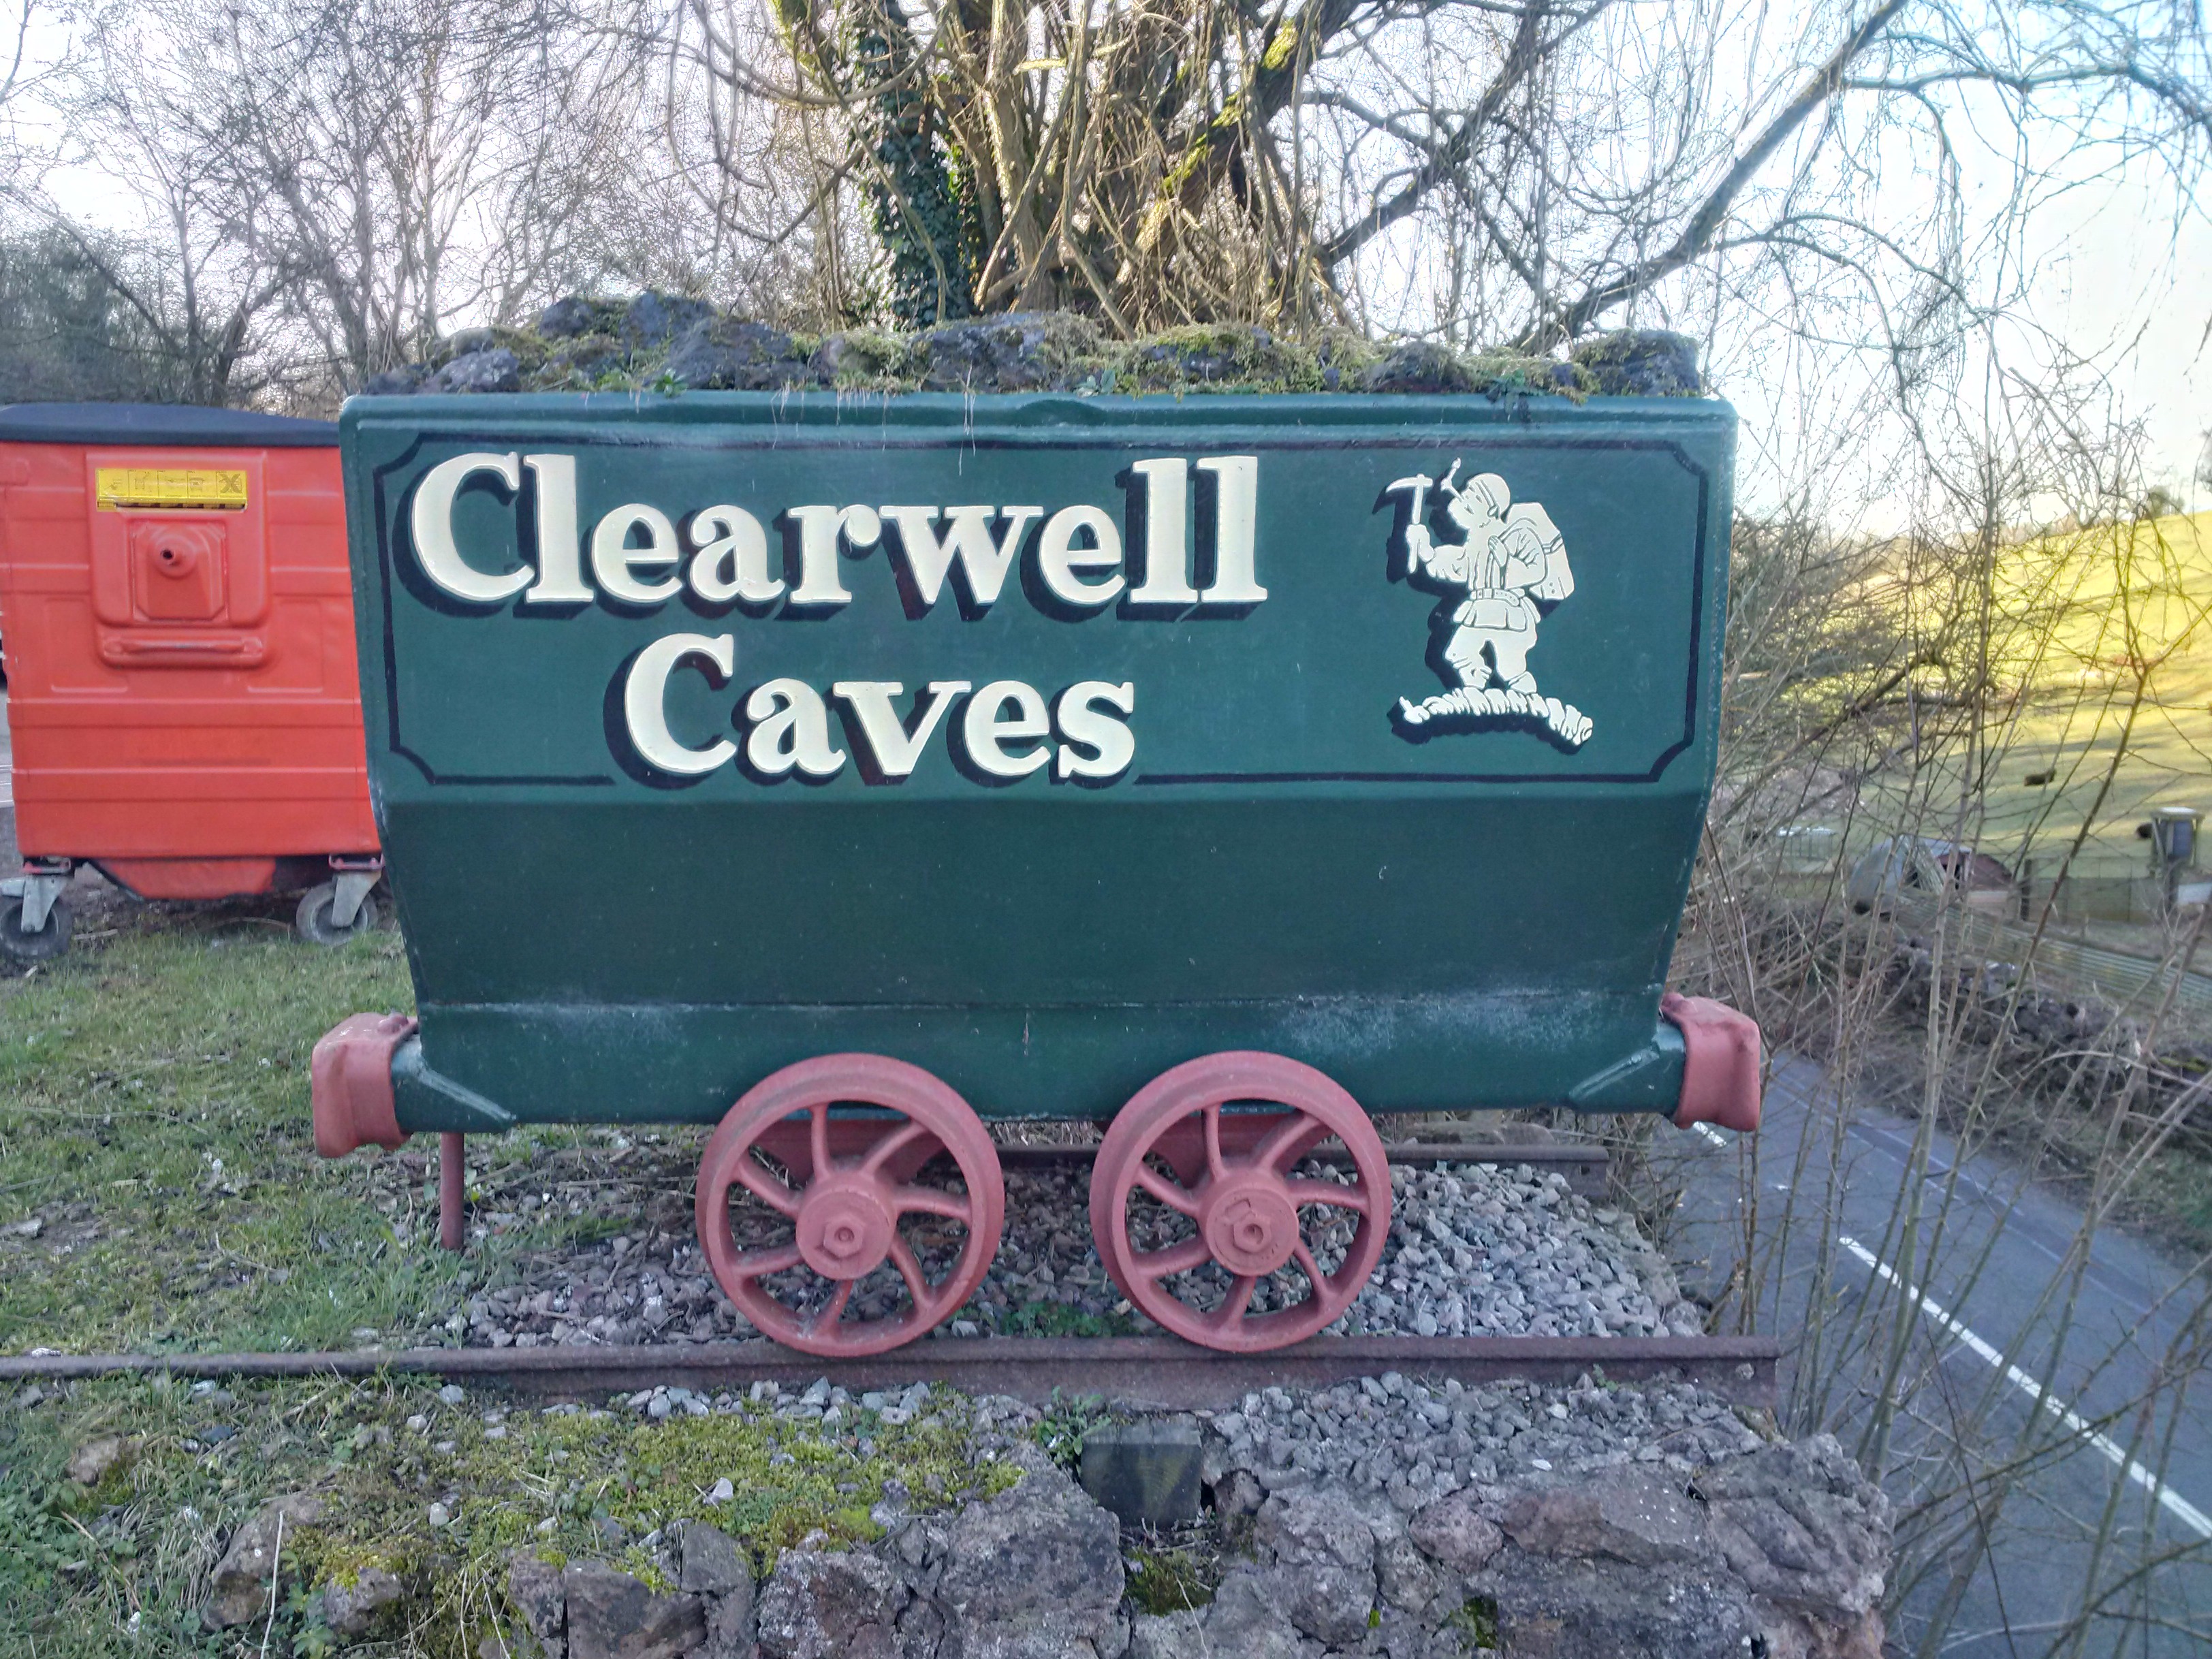 Clearwell Caves wagon